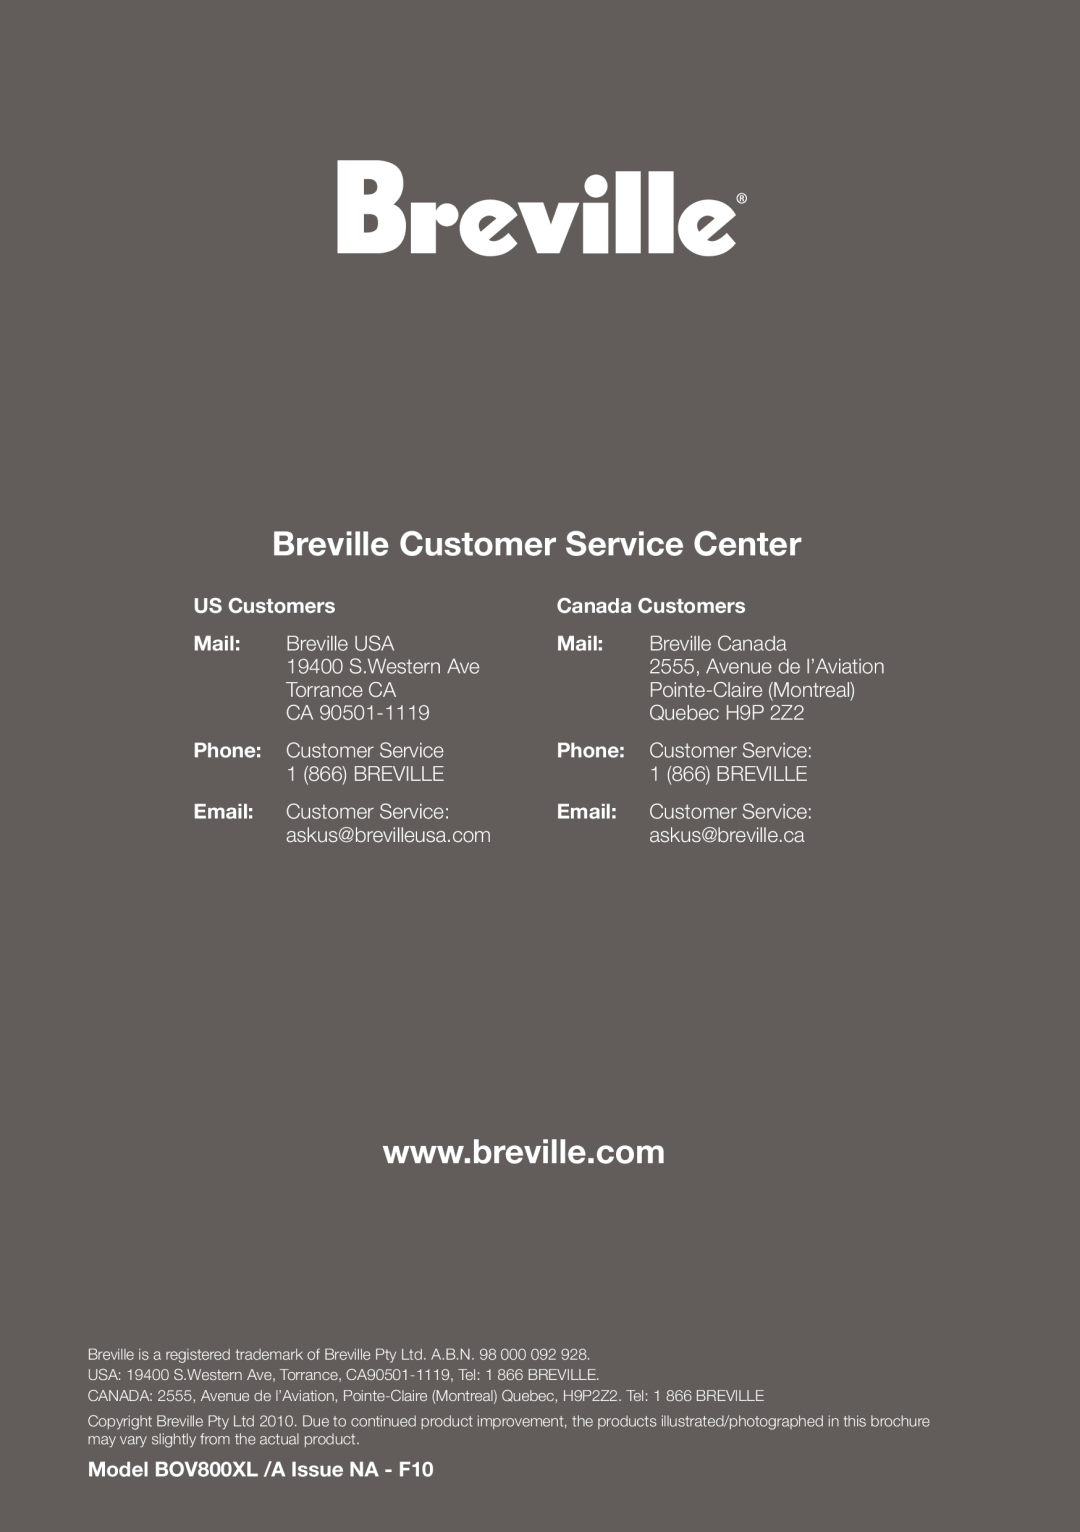 Breville BOV800XL /A manual Breville Customer Service Center, US Customers, Canada Customers, Mail, Phone, Email 